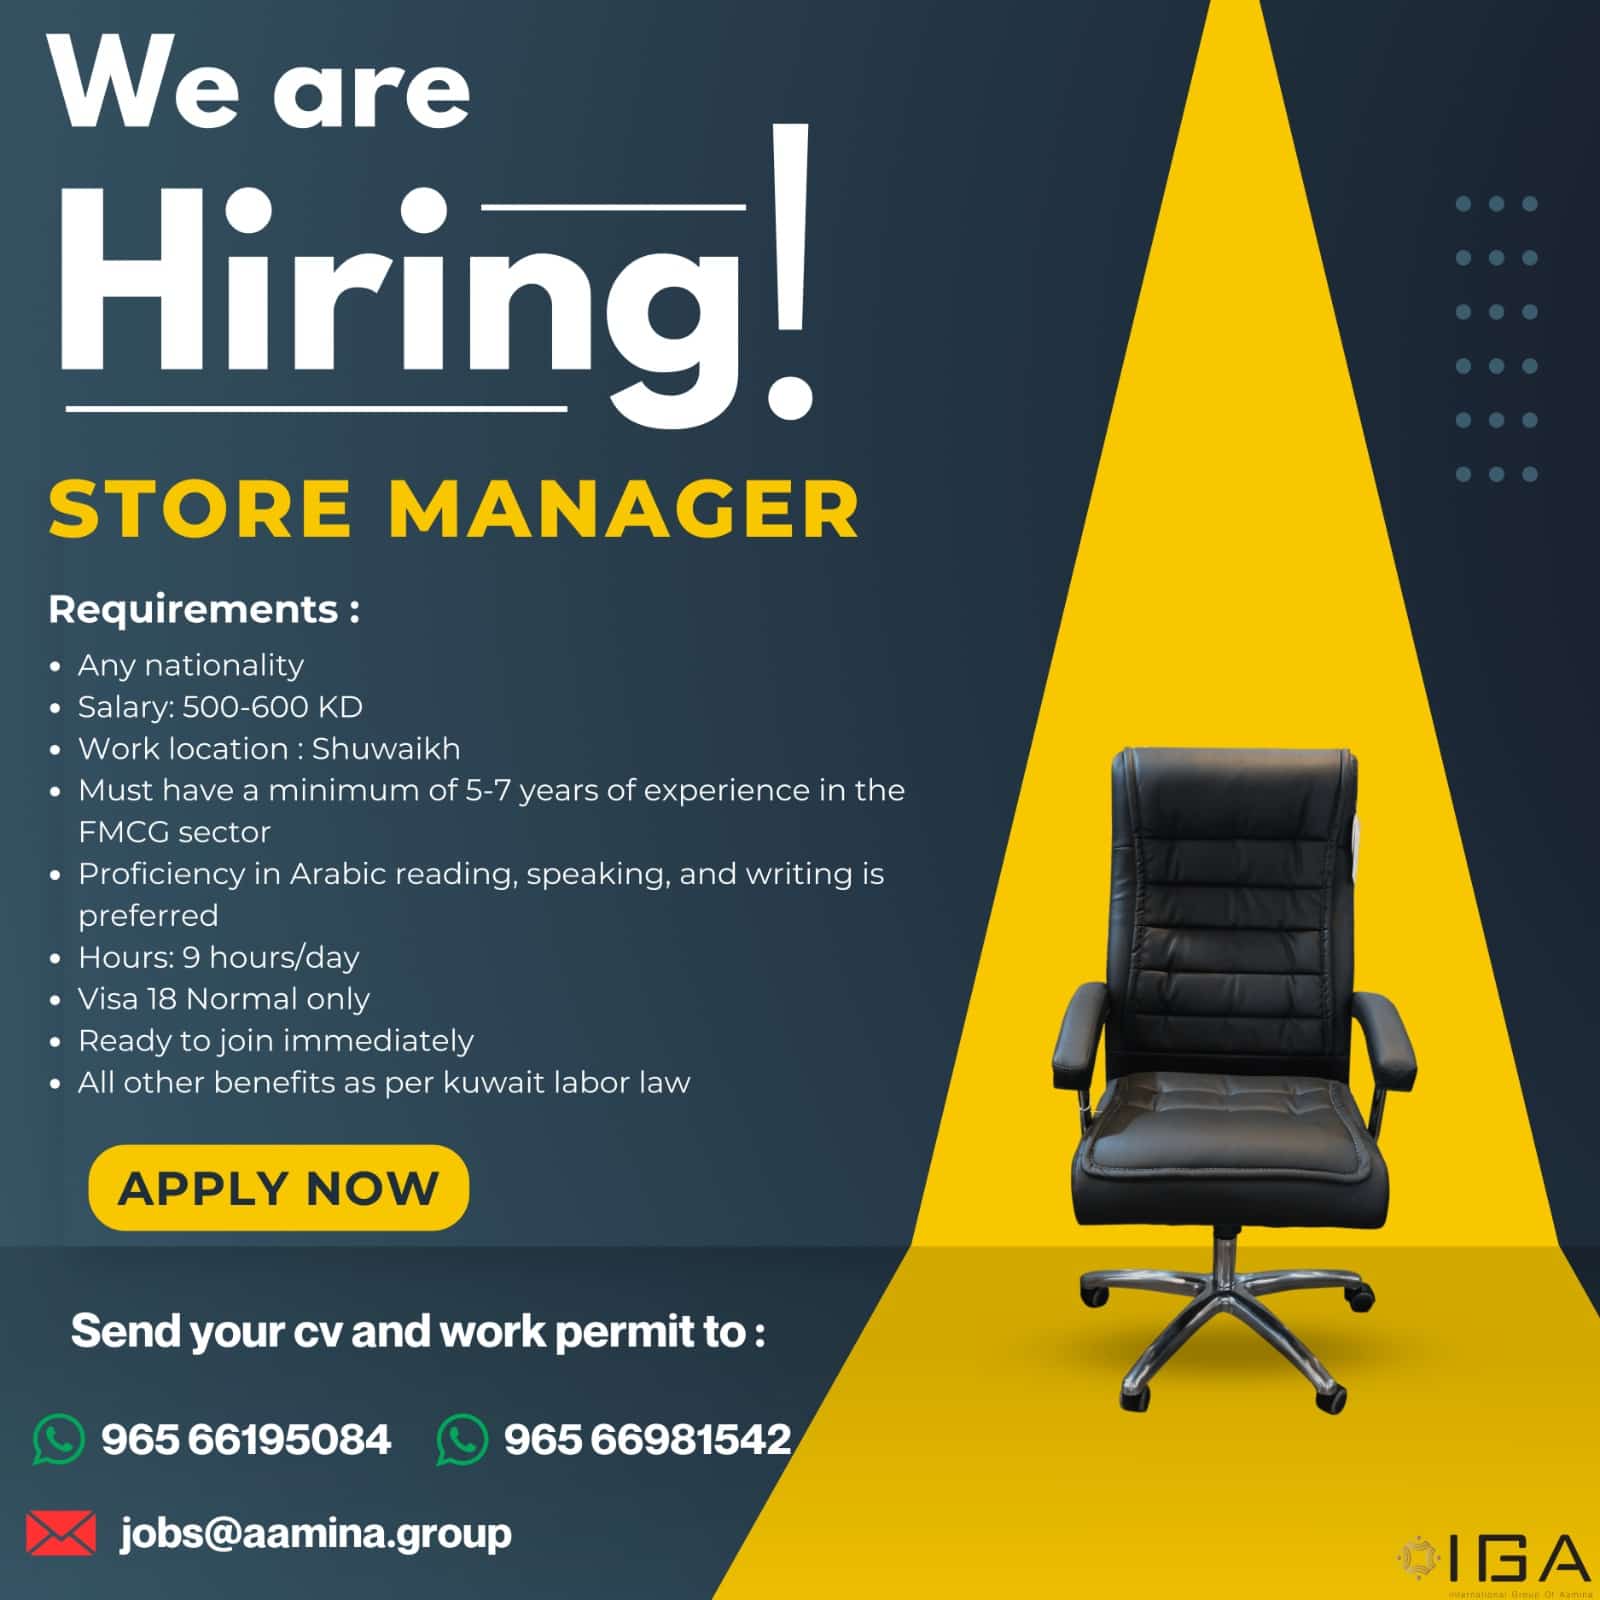 FMCG Store Manager